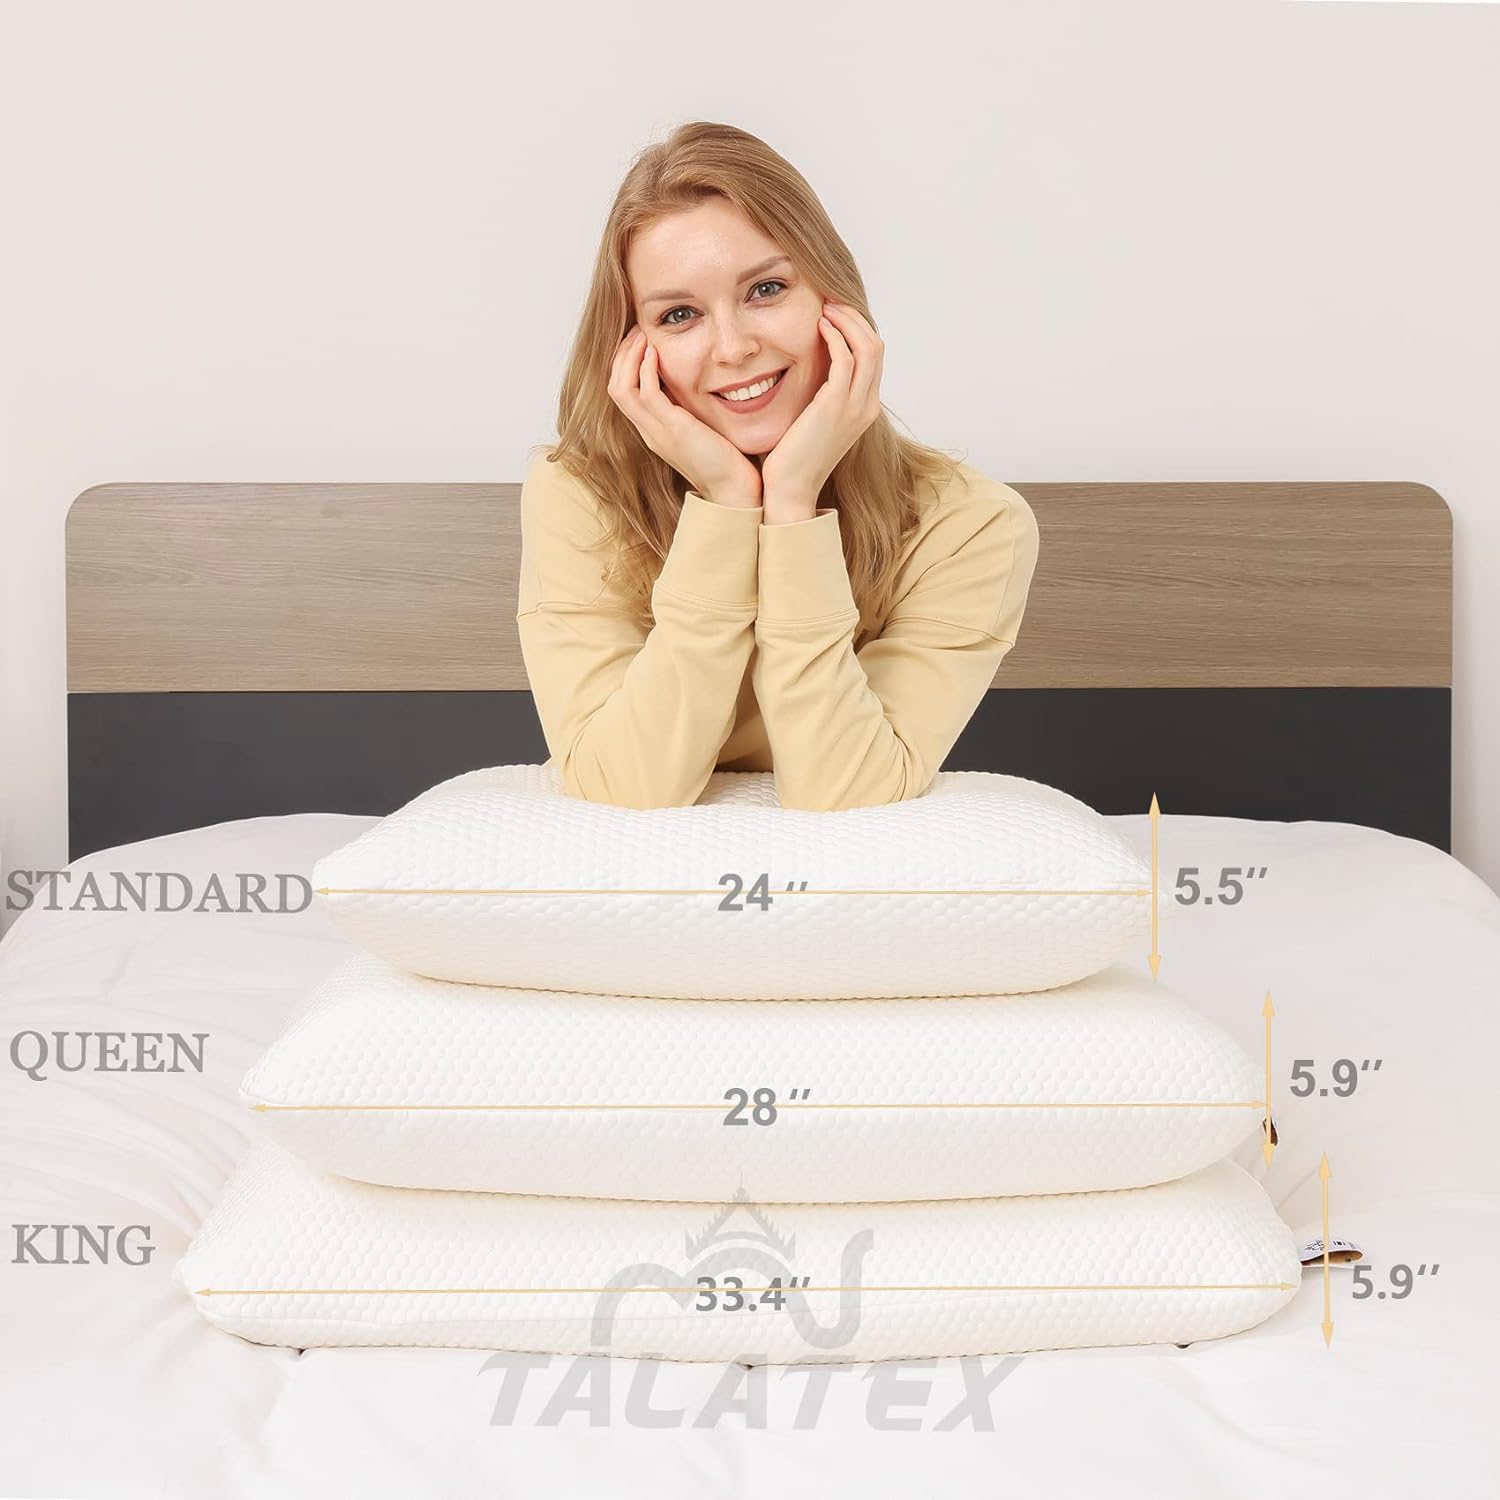 Great Choice Products Talatex Talalay 100% Natural Premium Latex Pillow, Helps Relieve Pressure, No Memory Foam Chemicals, Perfect Package Bes…